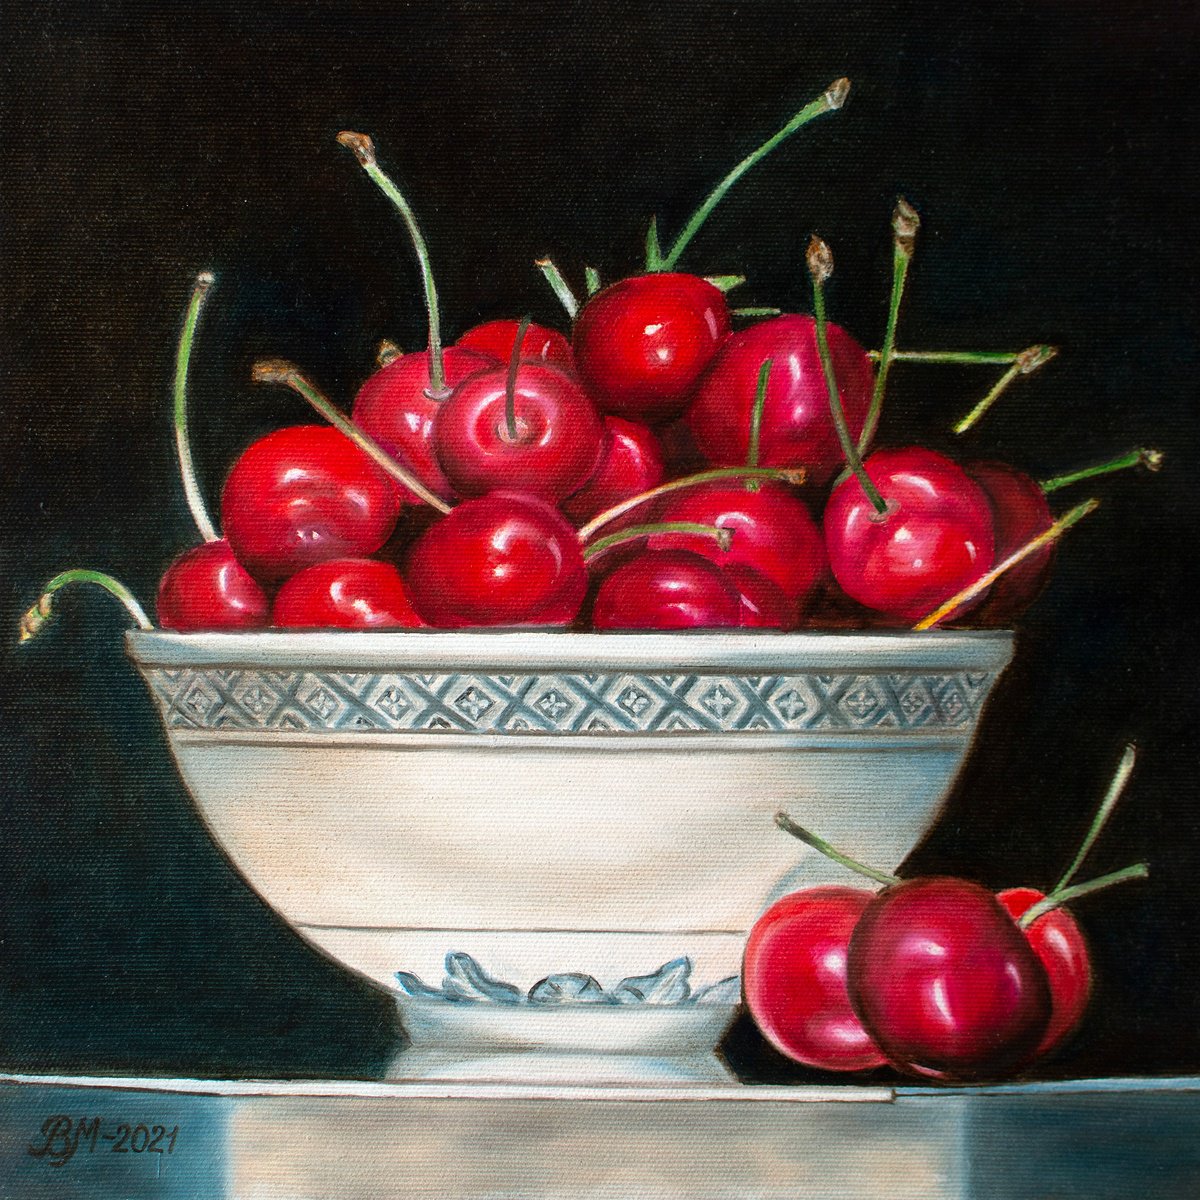 BOWL OF CHERRIES by Vera Melnyk (gift, Original Oil Painting Gift for nature lovers) by Vera Melnyk